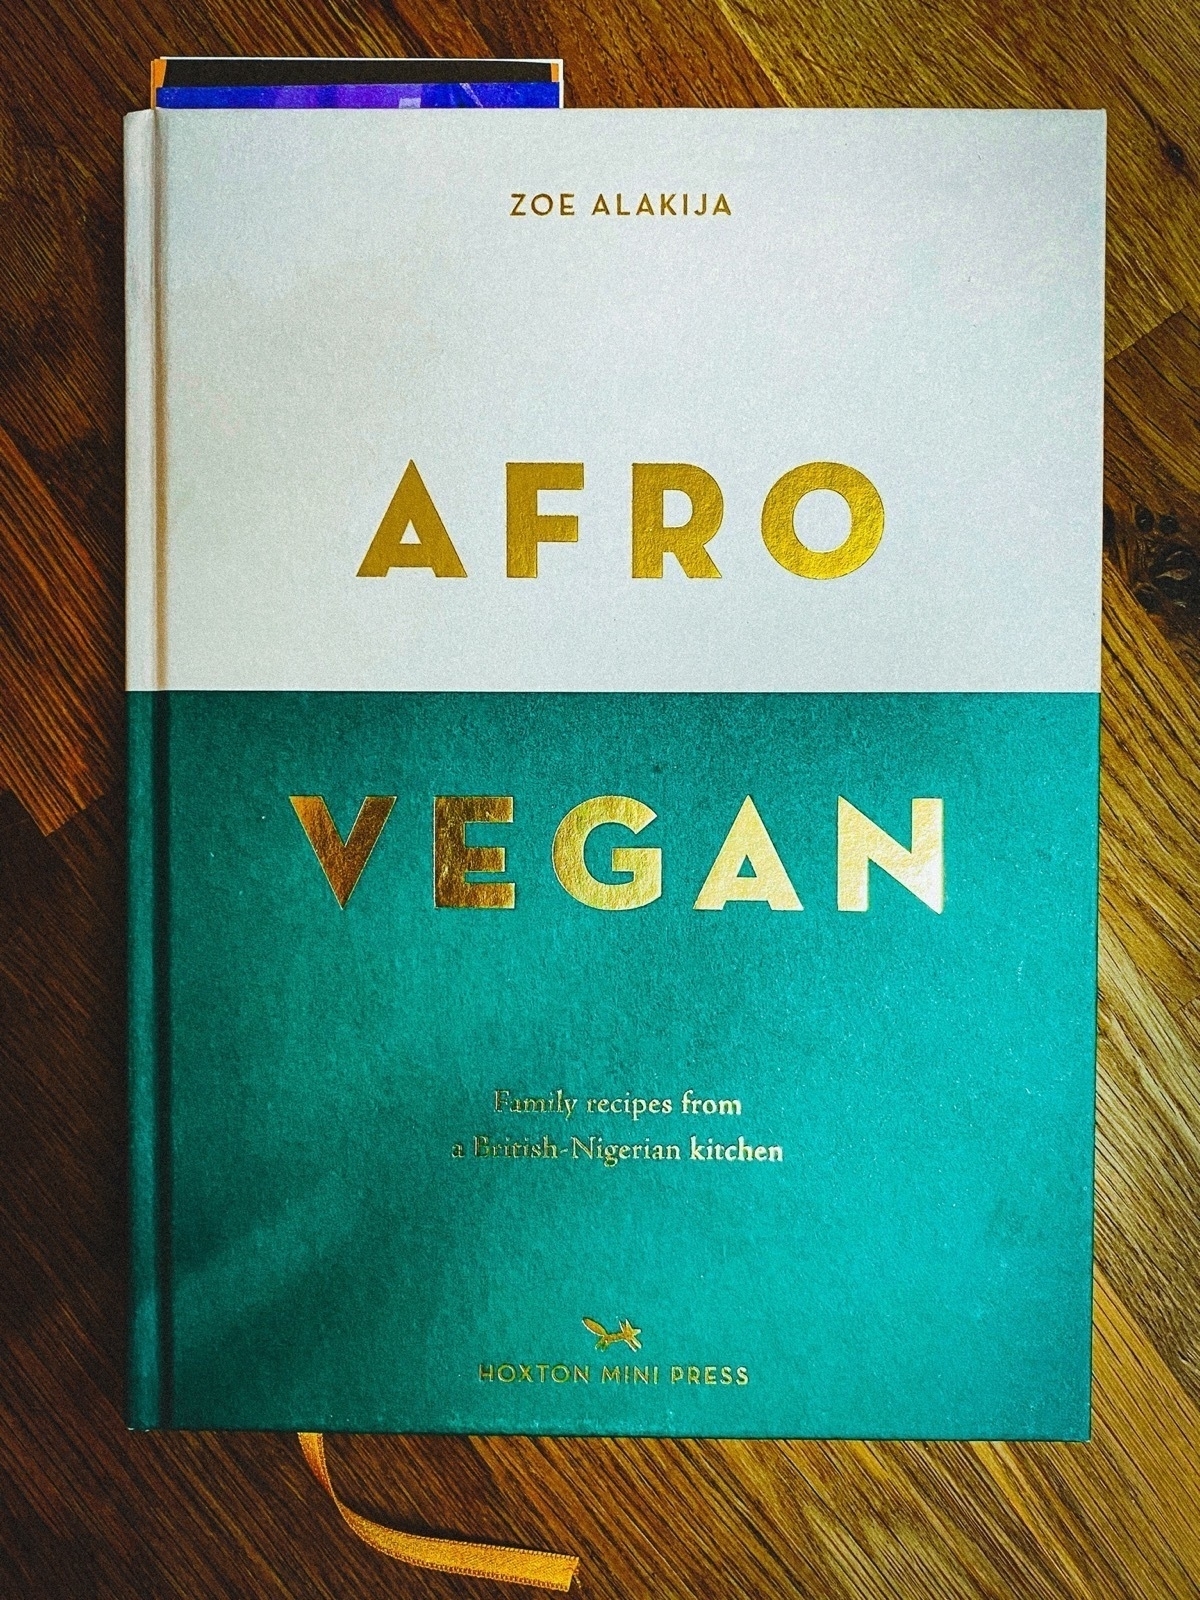 Cover of cookery book titled Afro Vegan